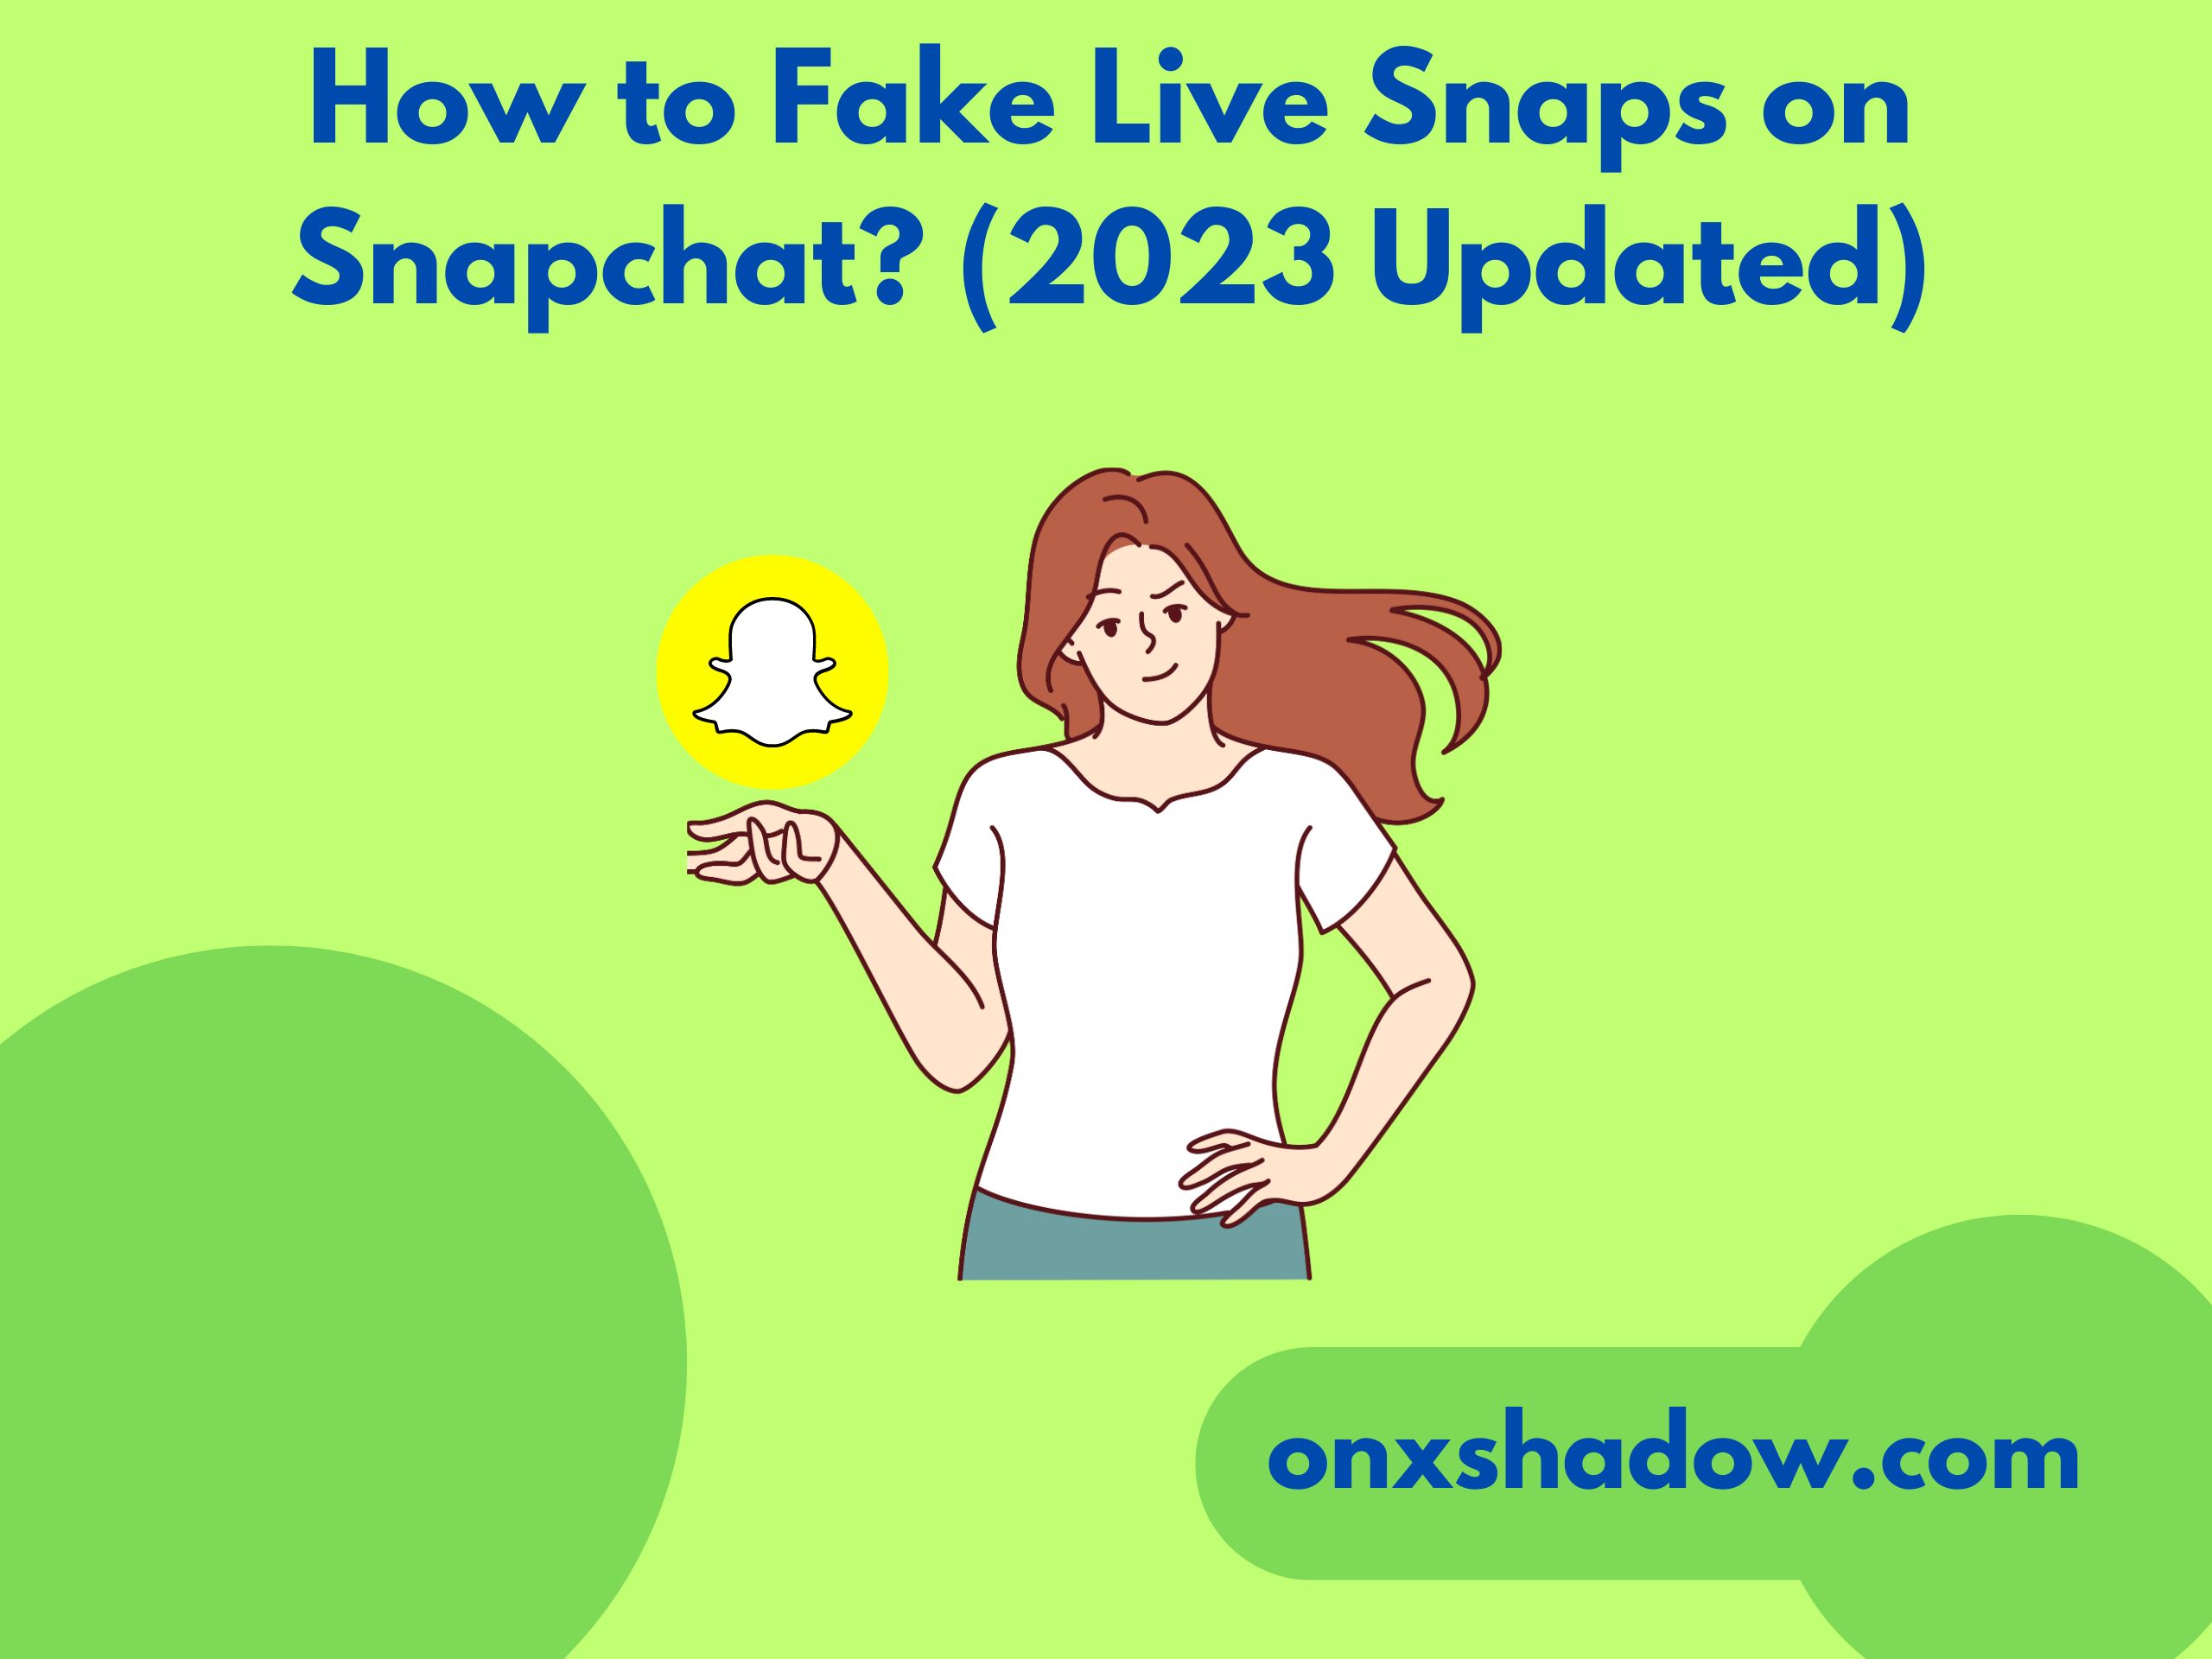 How to Fake Live Snaps on Snapchat? (2023 Updated)